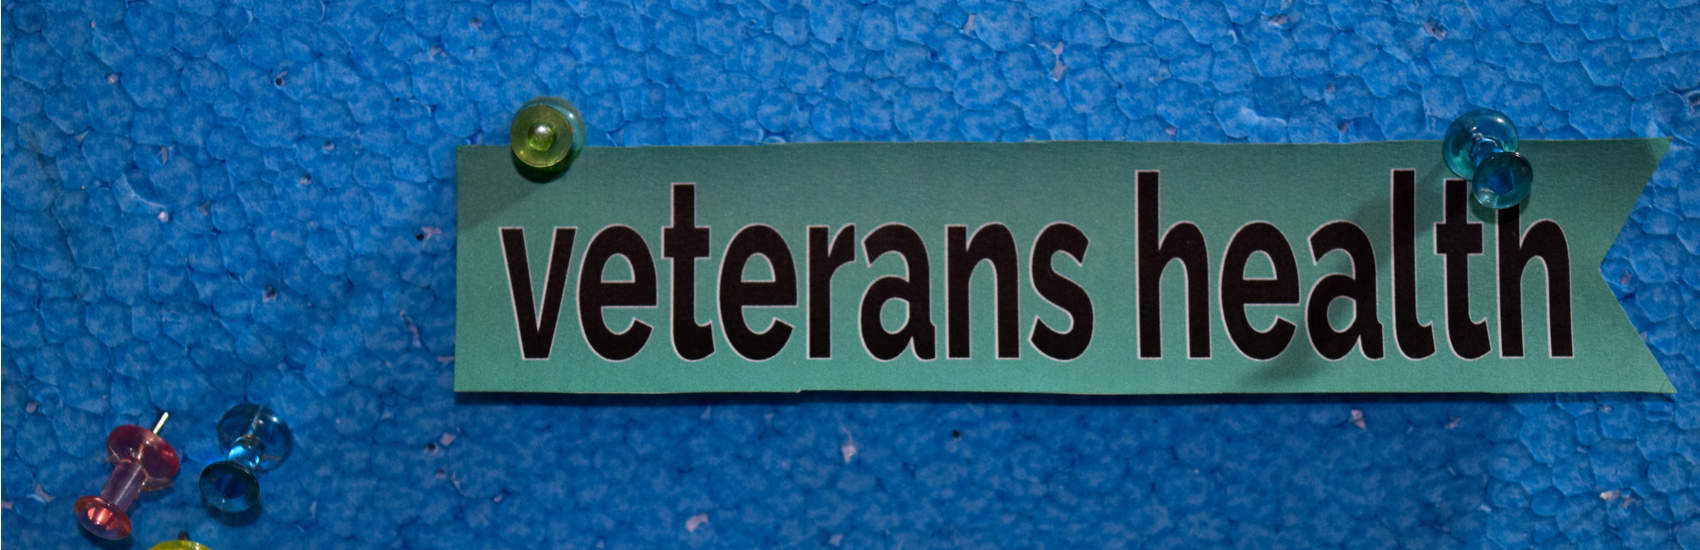 NHS ‘completely fails’ veterans on mental health